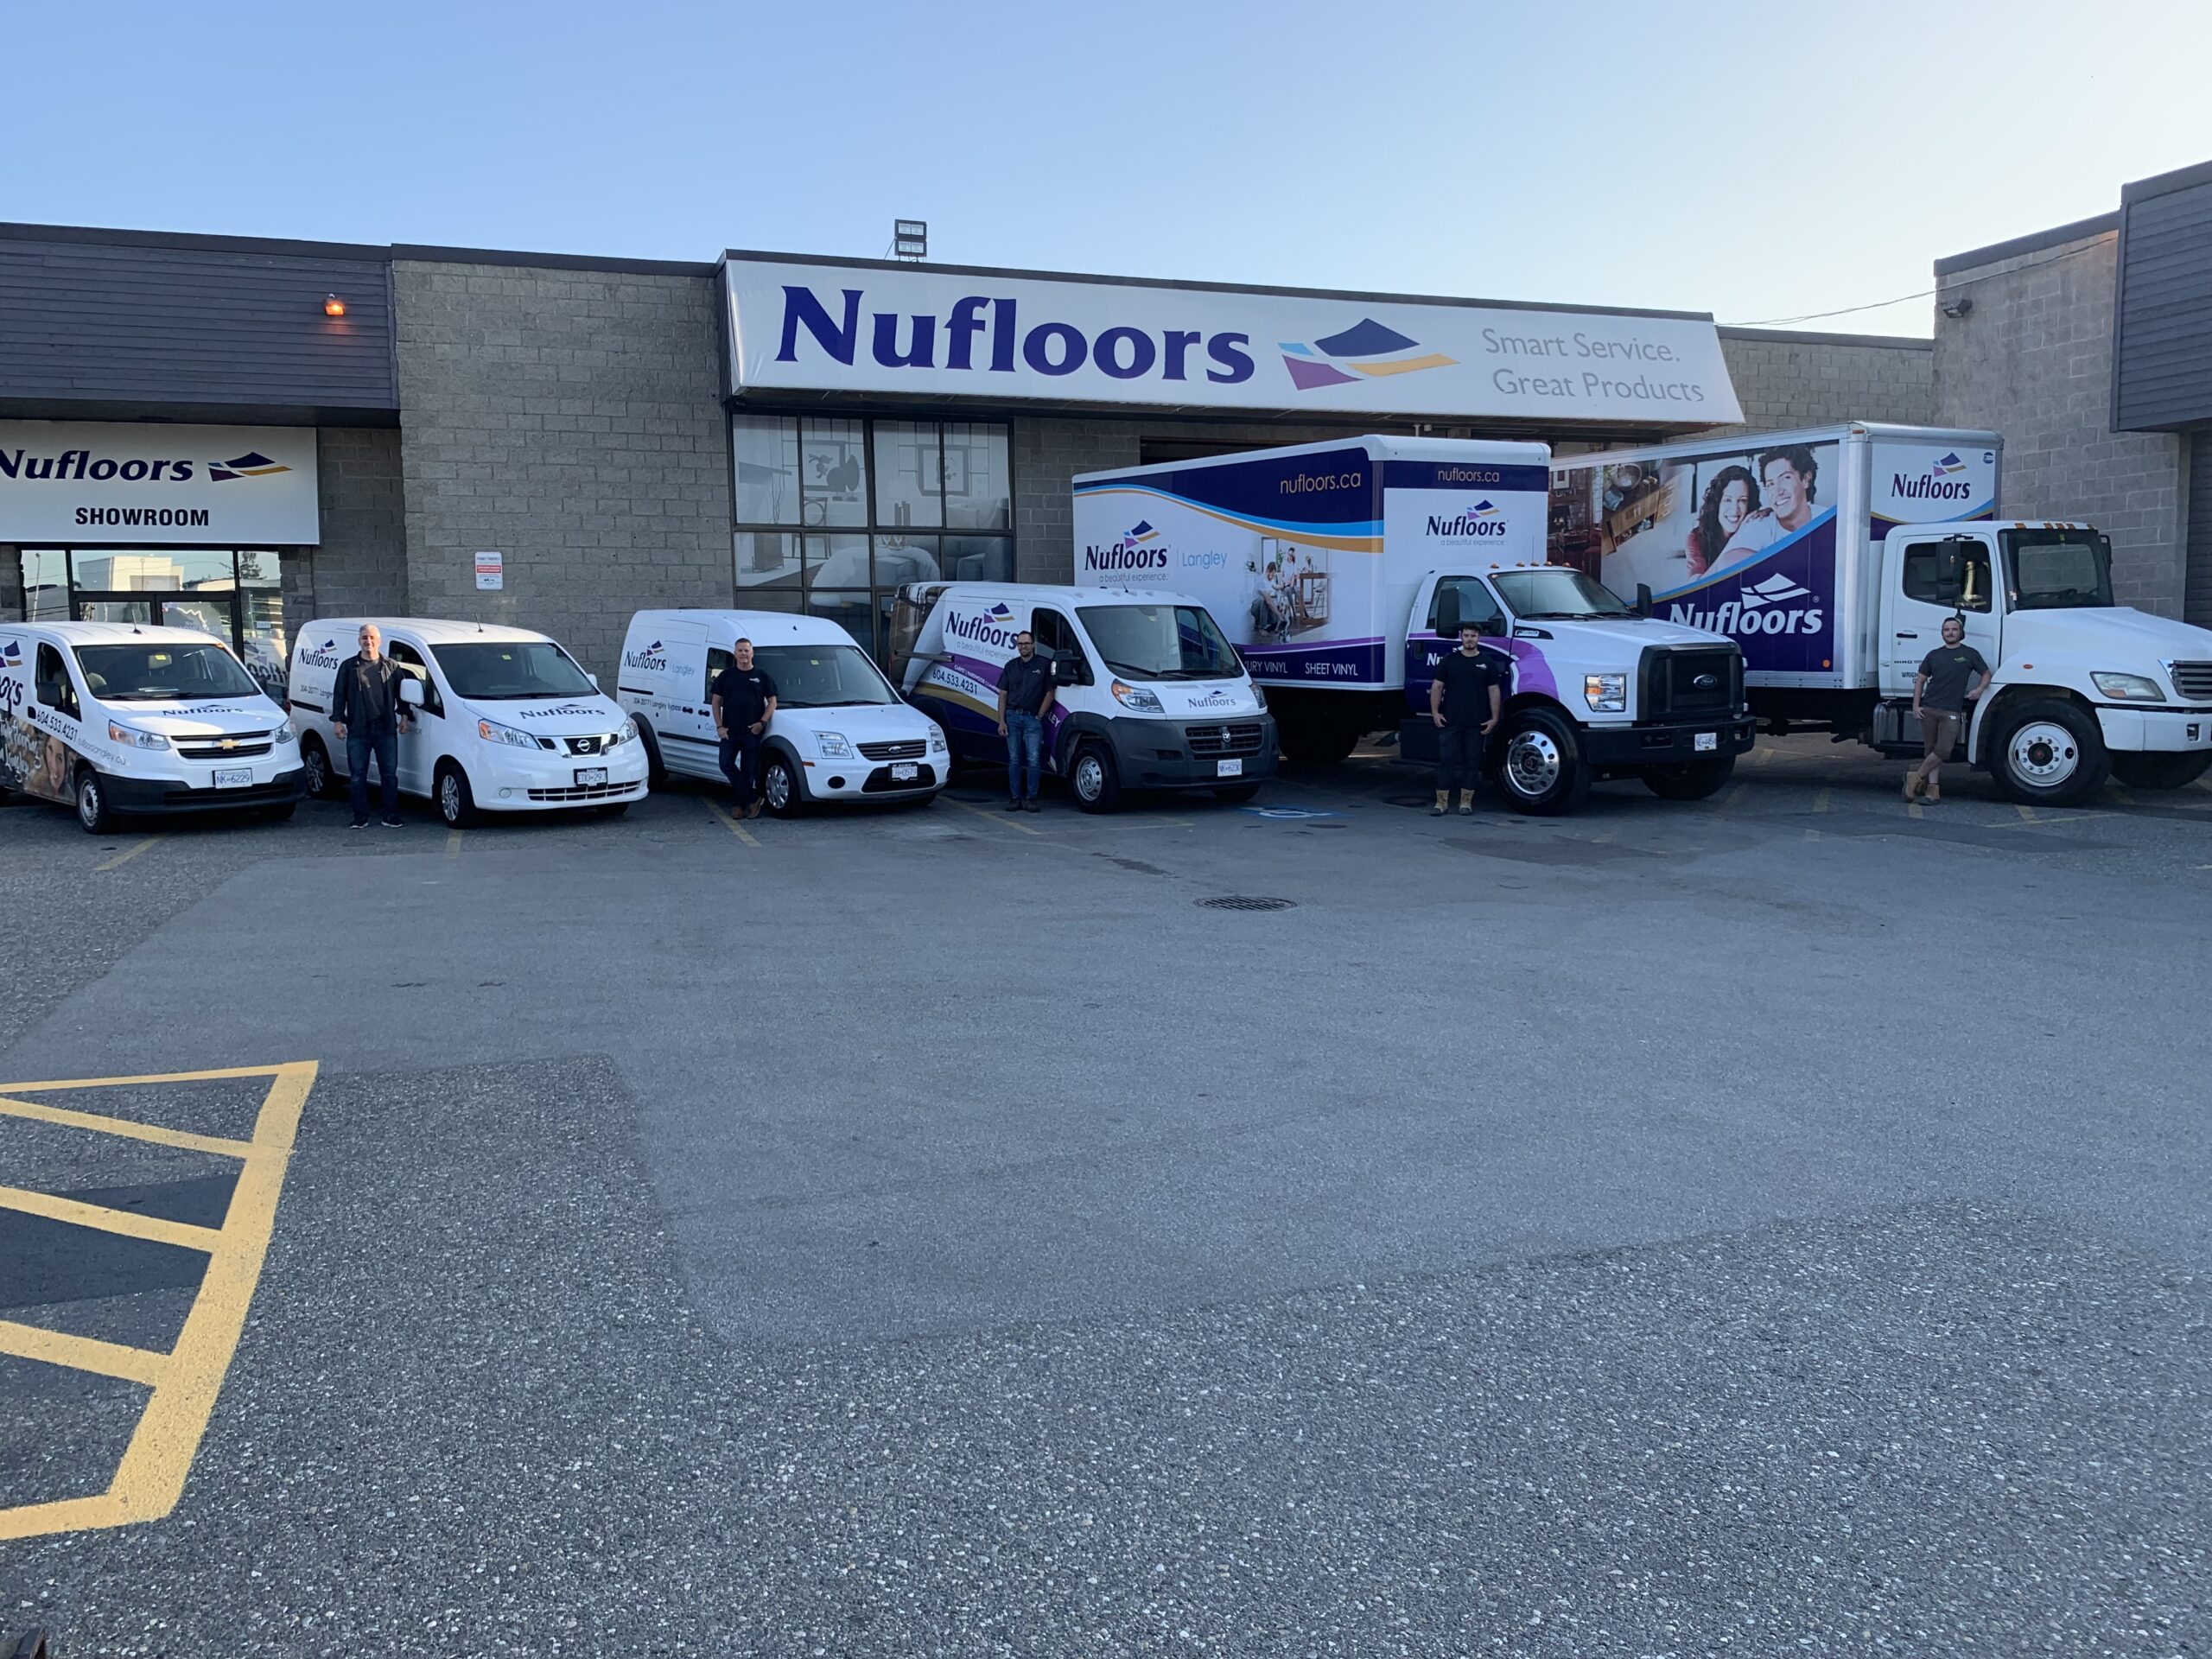 Nufloors Langley fleet parked outside of the Langley store